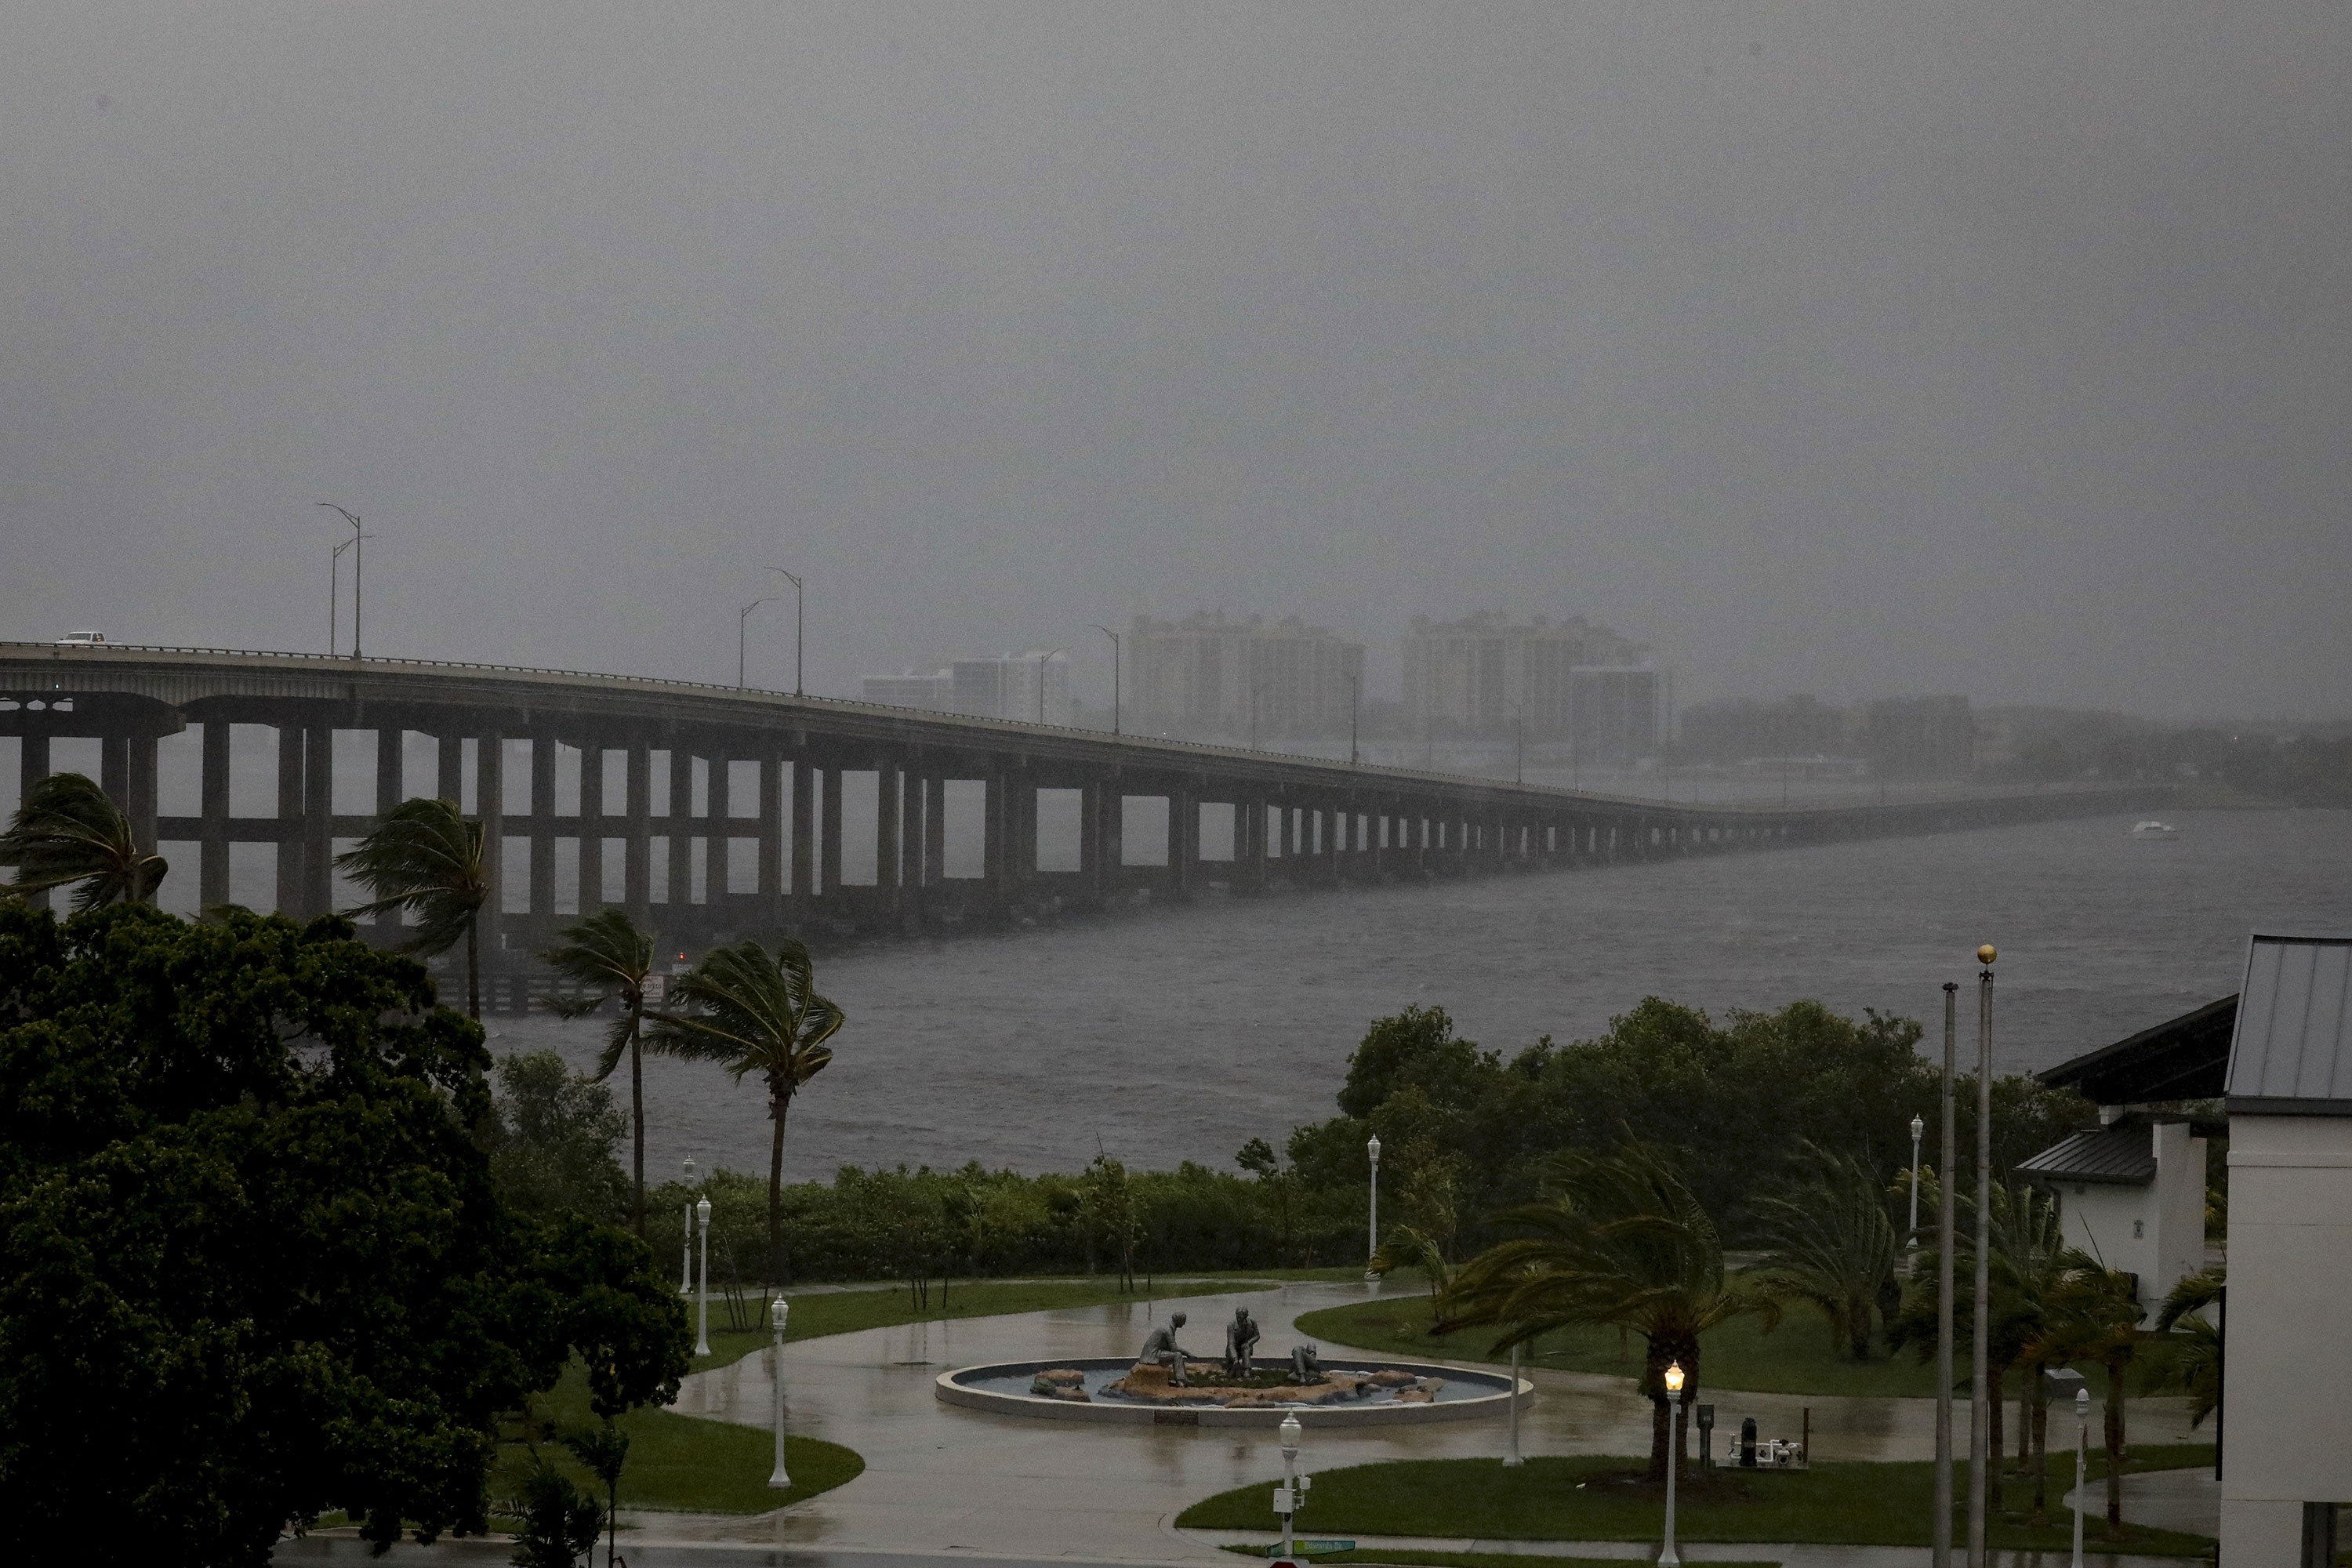 Heavy rain and wind is seen at the Caloosahatchee Bridge in Fort Myers, Florida, on Wednesday.